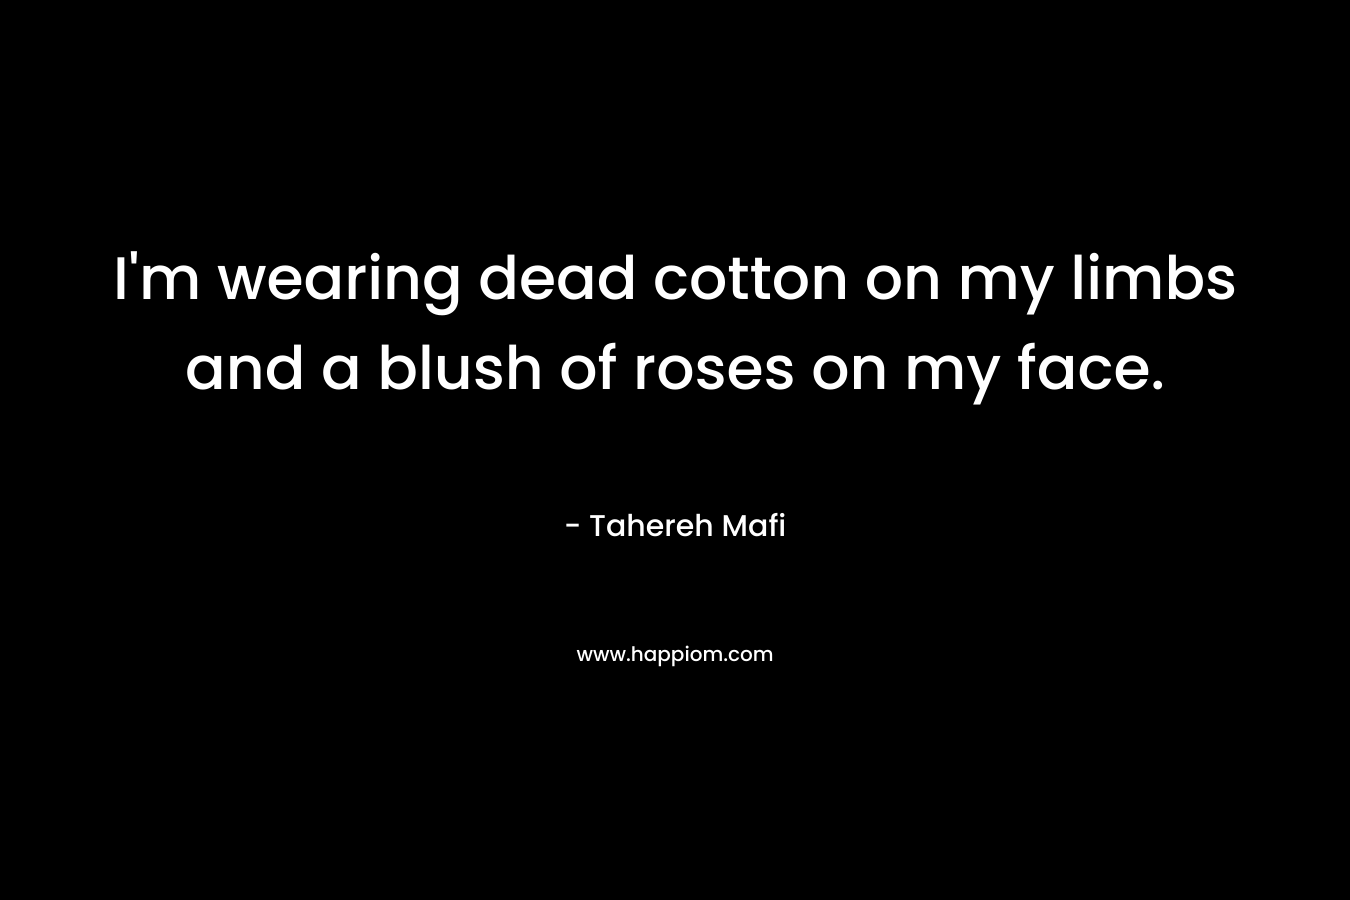 I'm wearing dead cotton on my limbs and a blush of roses on my face.